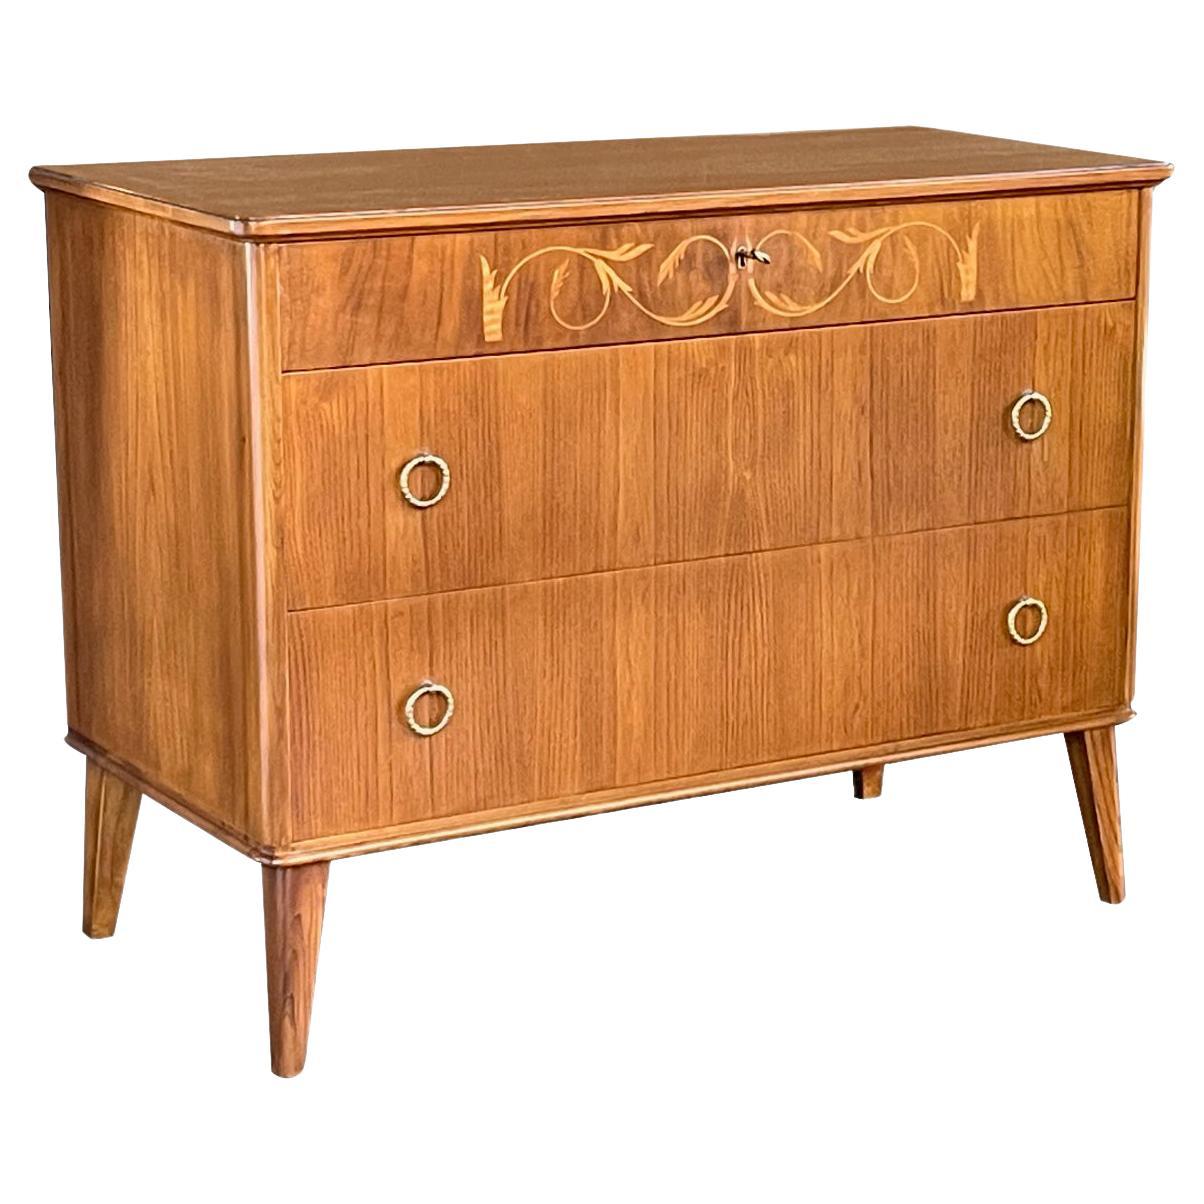 Mid-Century Modern Marquetry Inlaid Birch Chest of Drawers, Possibly Swedish For Sale